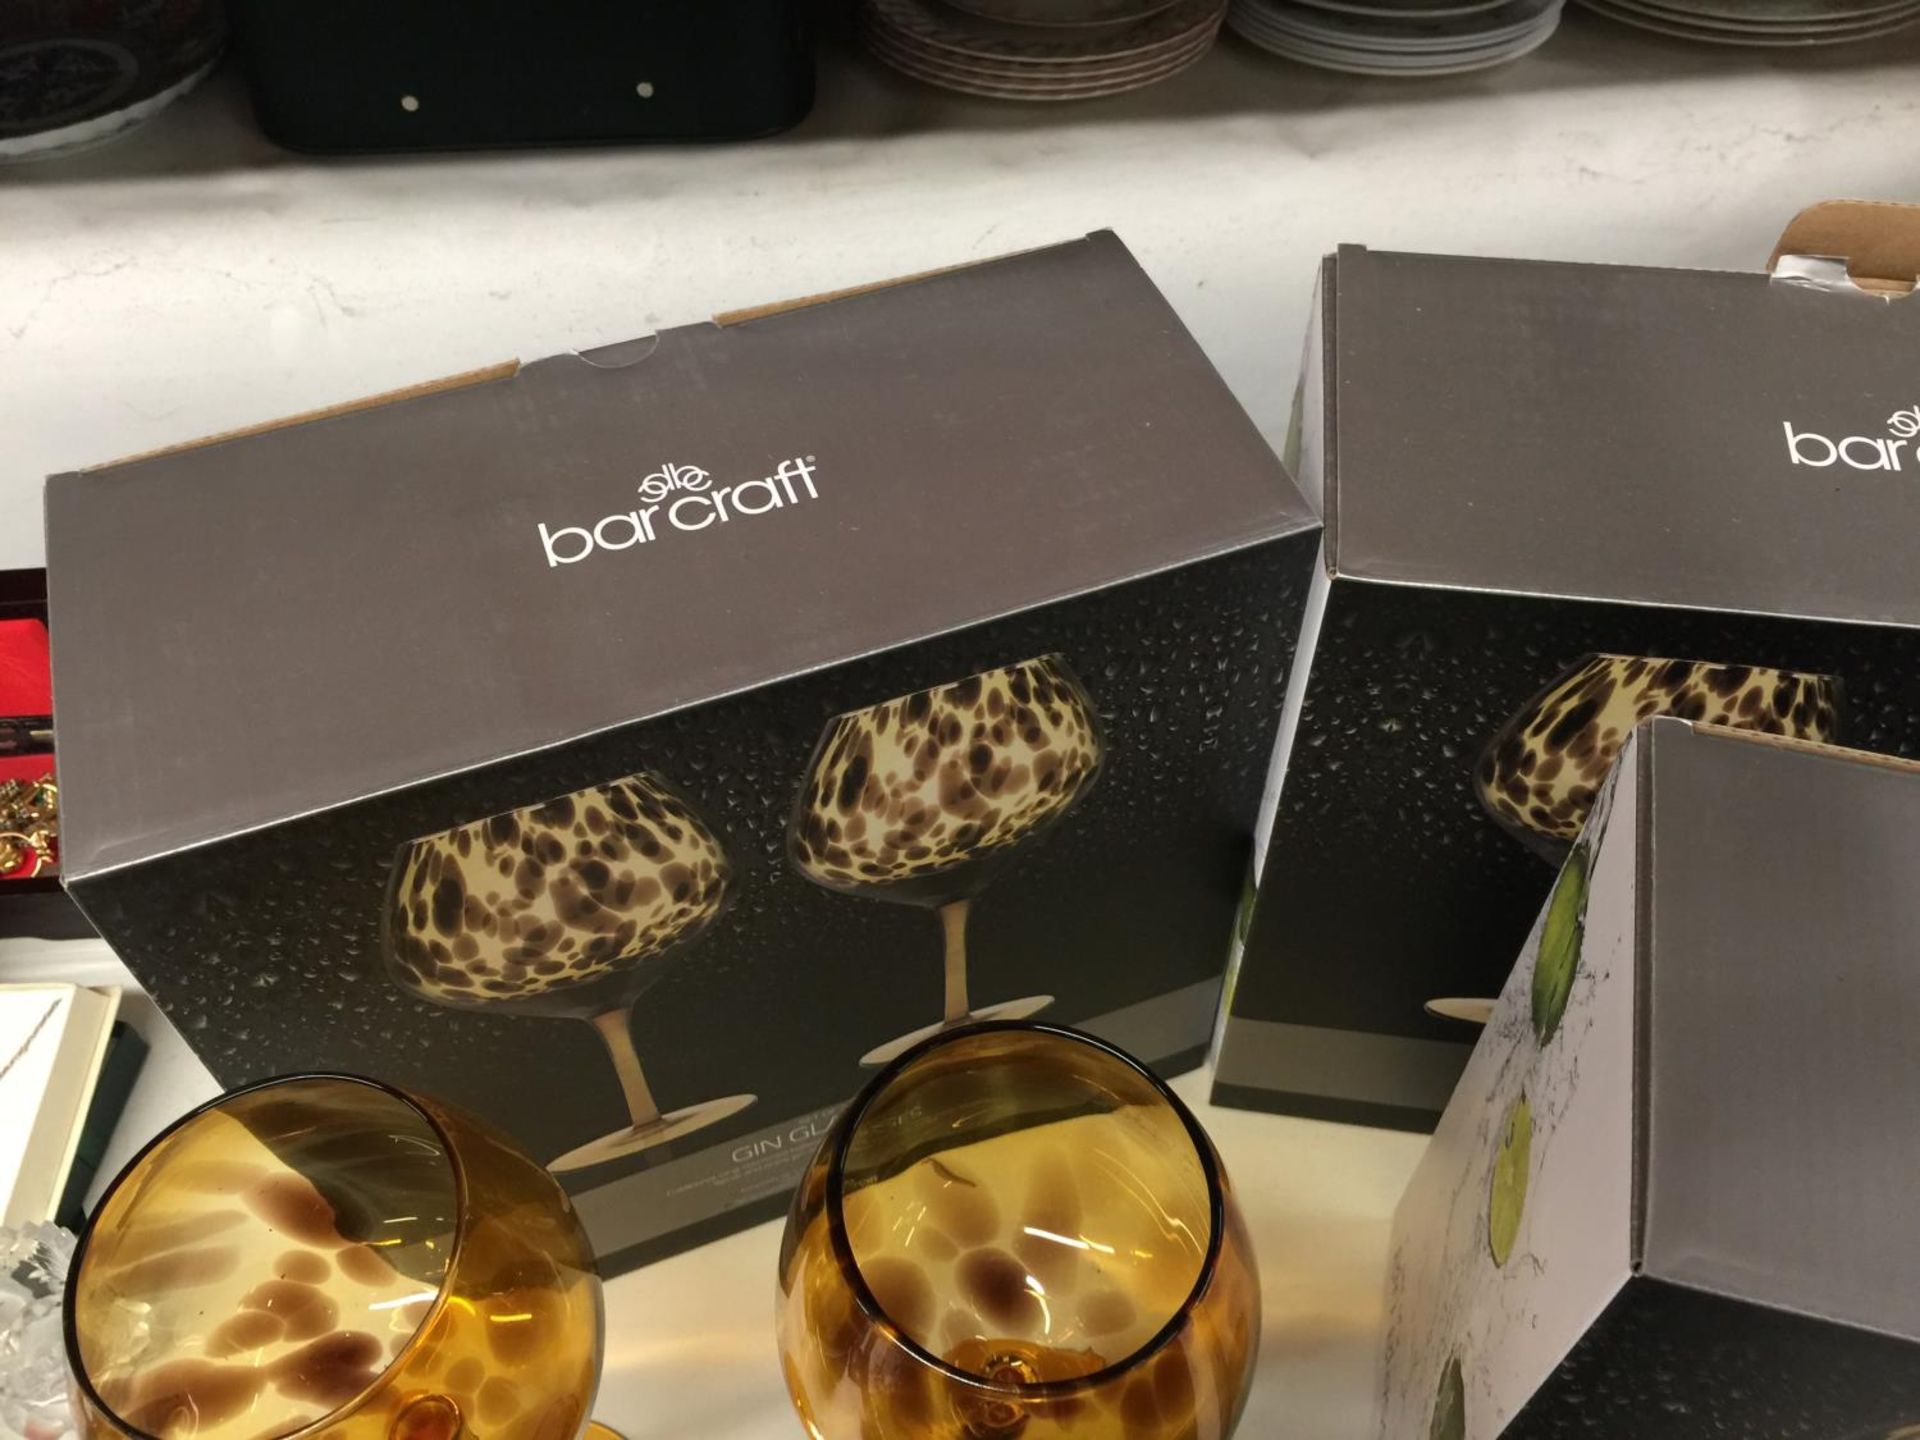 THREE BOXES EACH CONTAINING TWO BARCRAFT GIN GLASSES WITH A TORTOISHELL COLOURING, A BOXED COPPER - Image 4 of 5